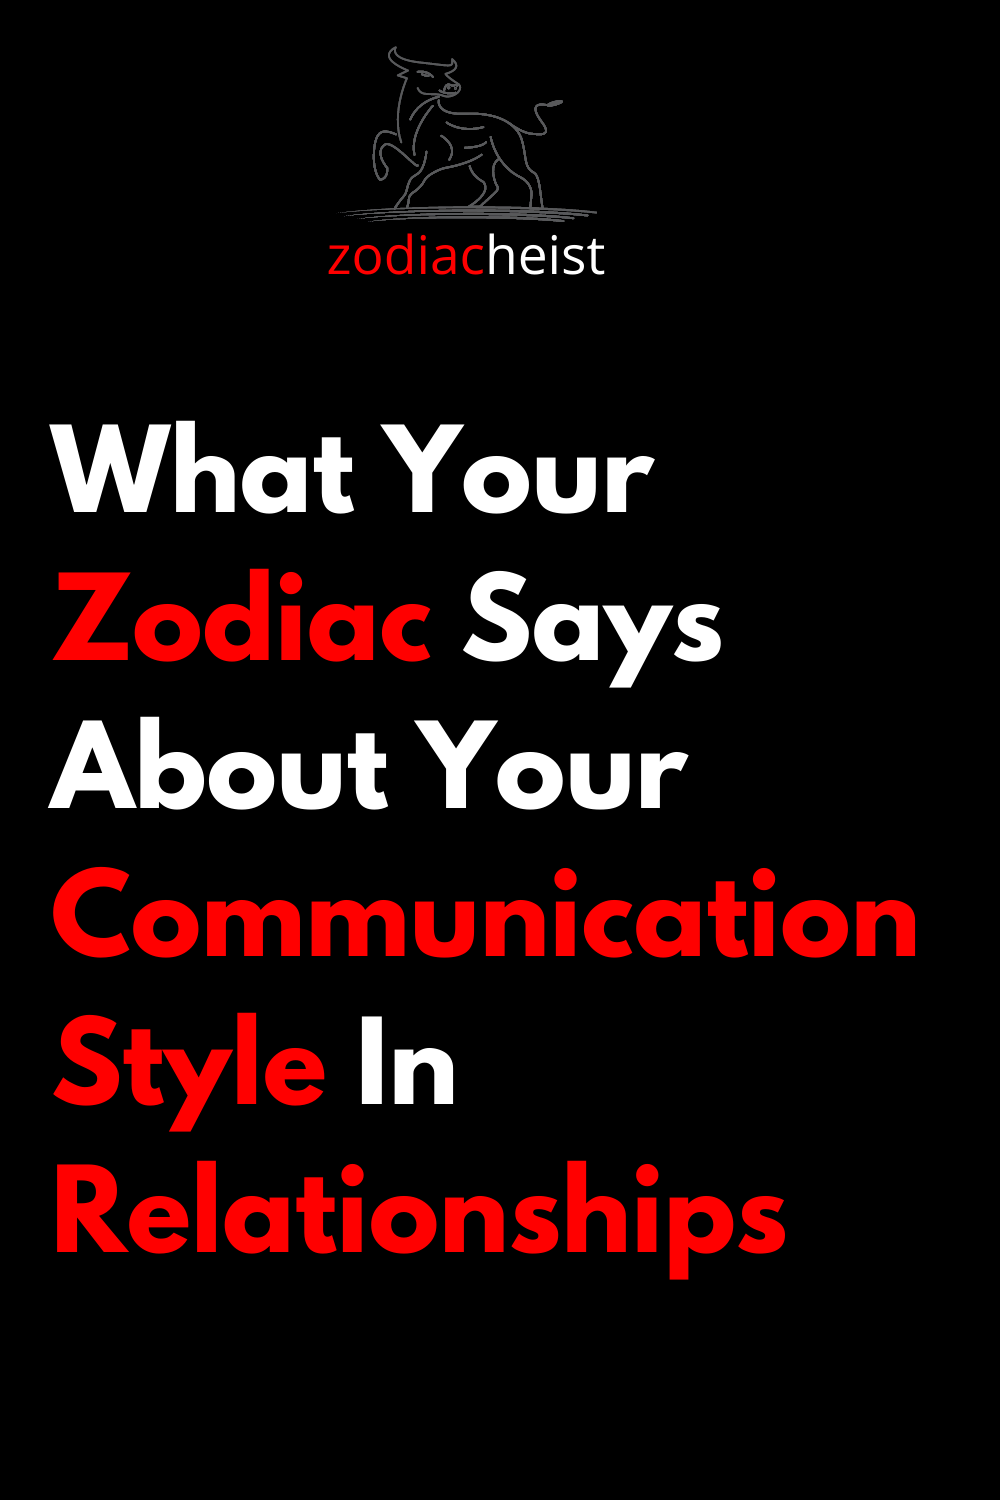 What Your Zodiac Says About Your Communication Style In Relationships